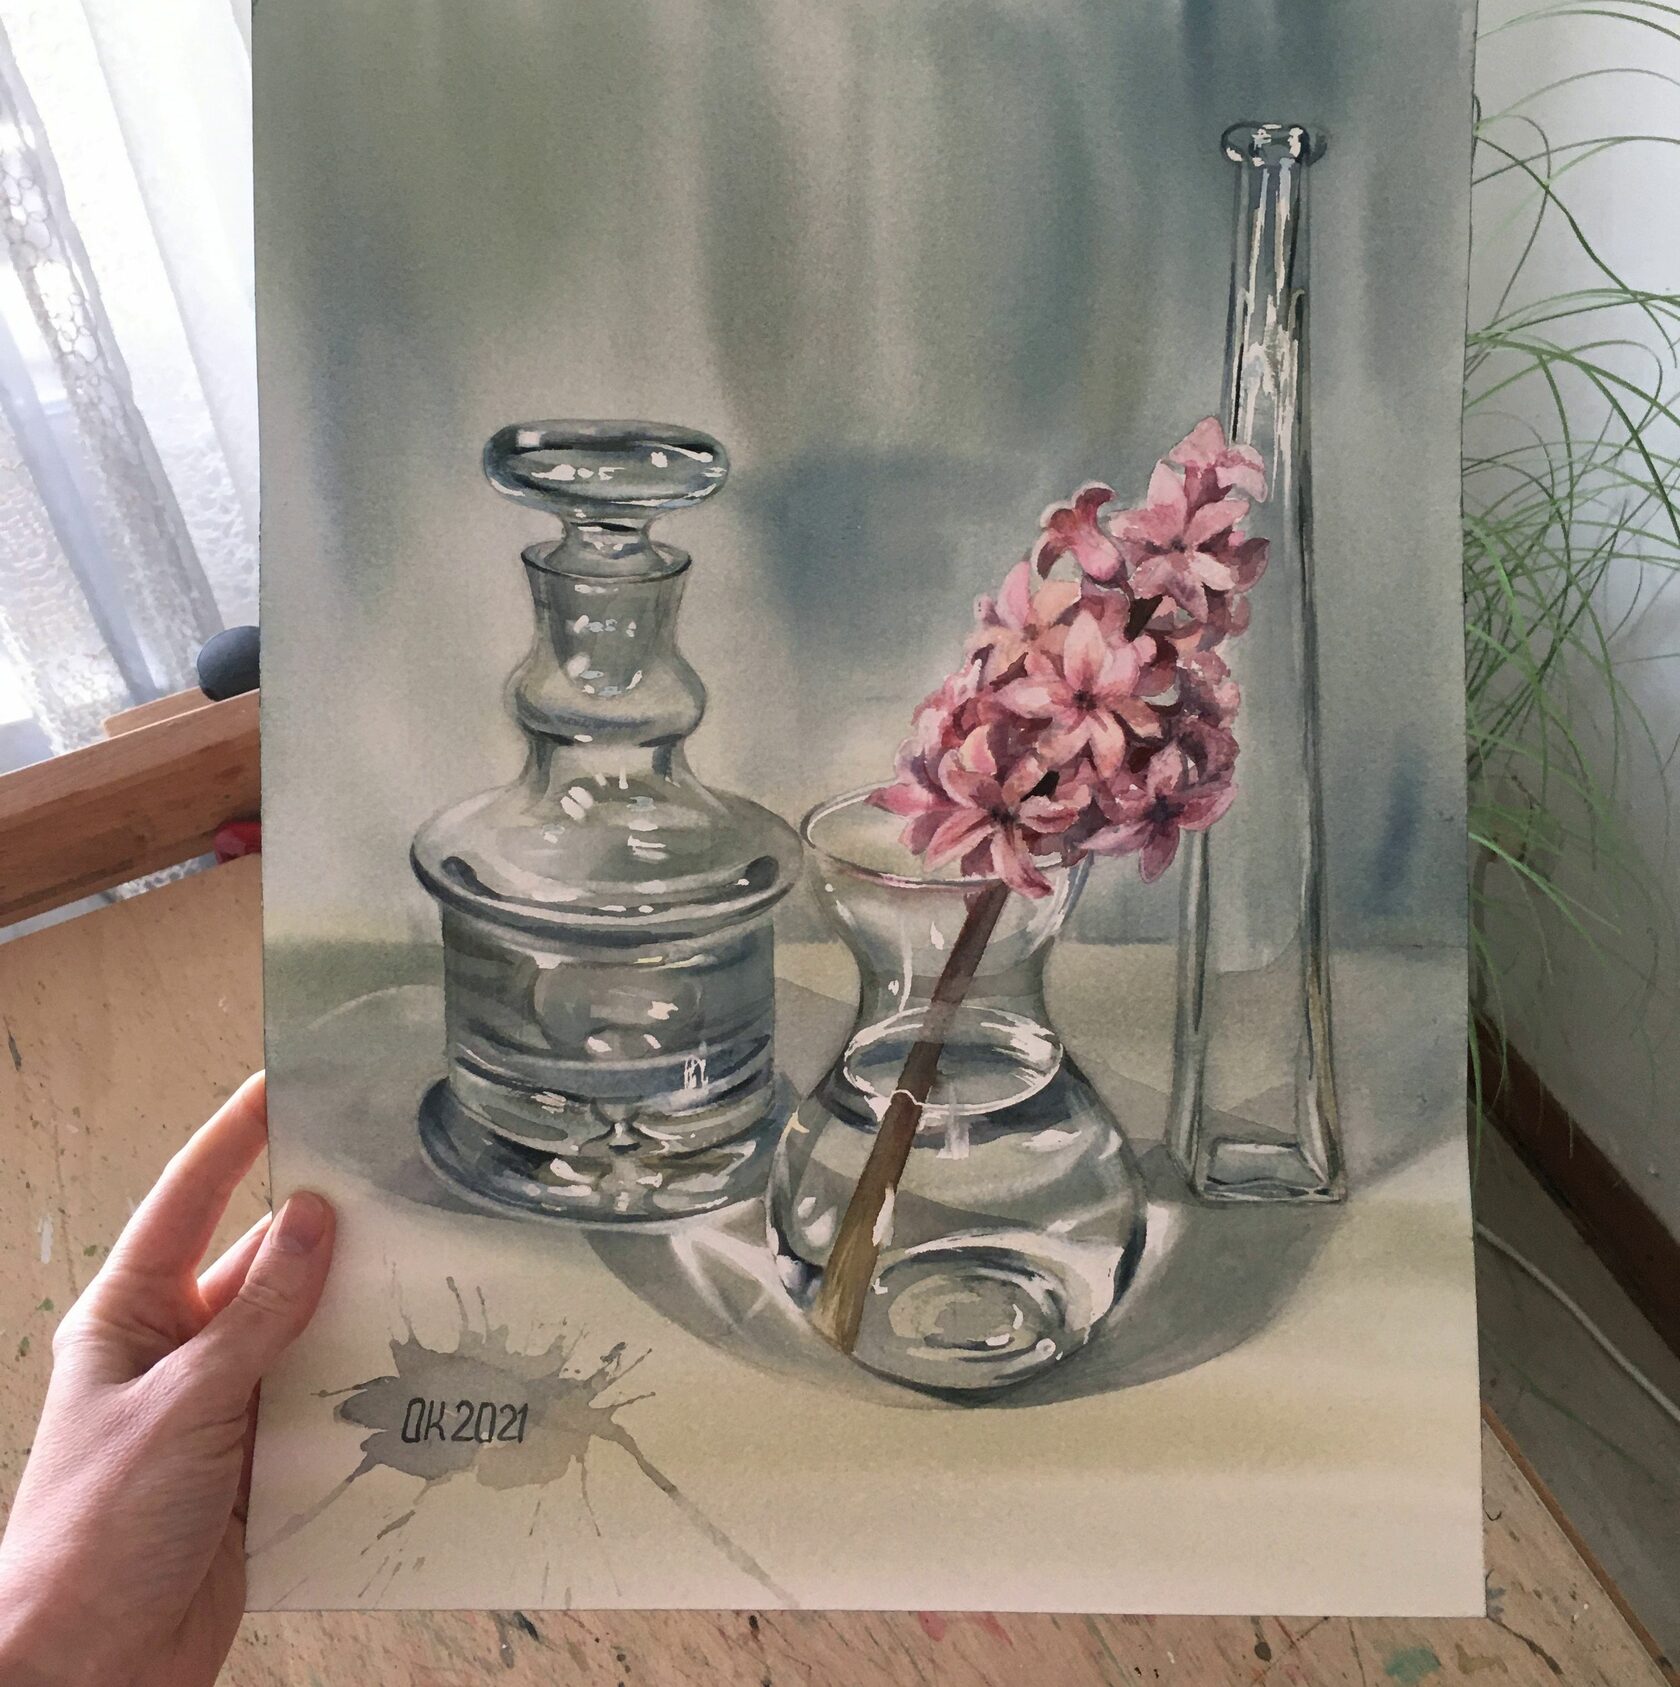 Hyacinth and glass watercolor painting